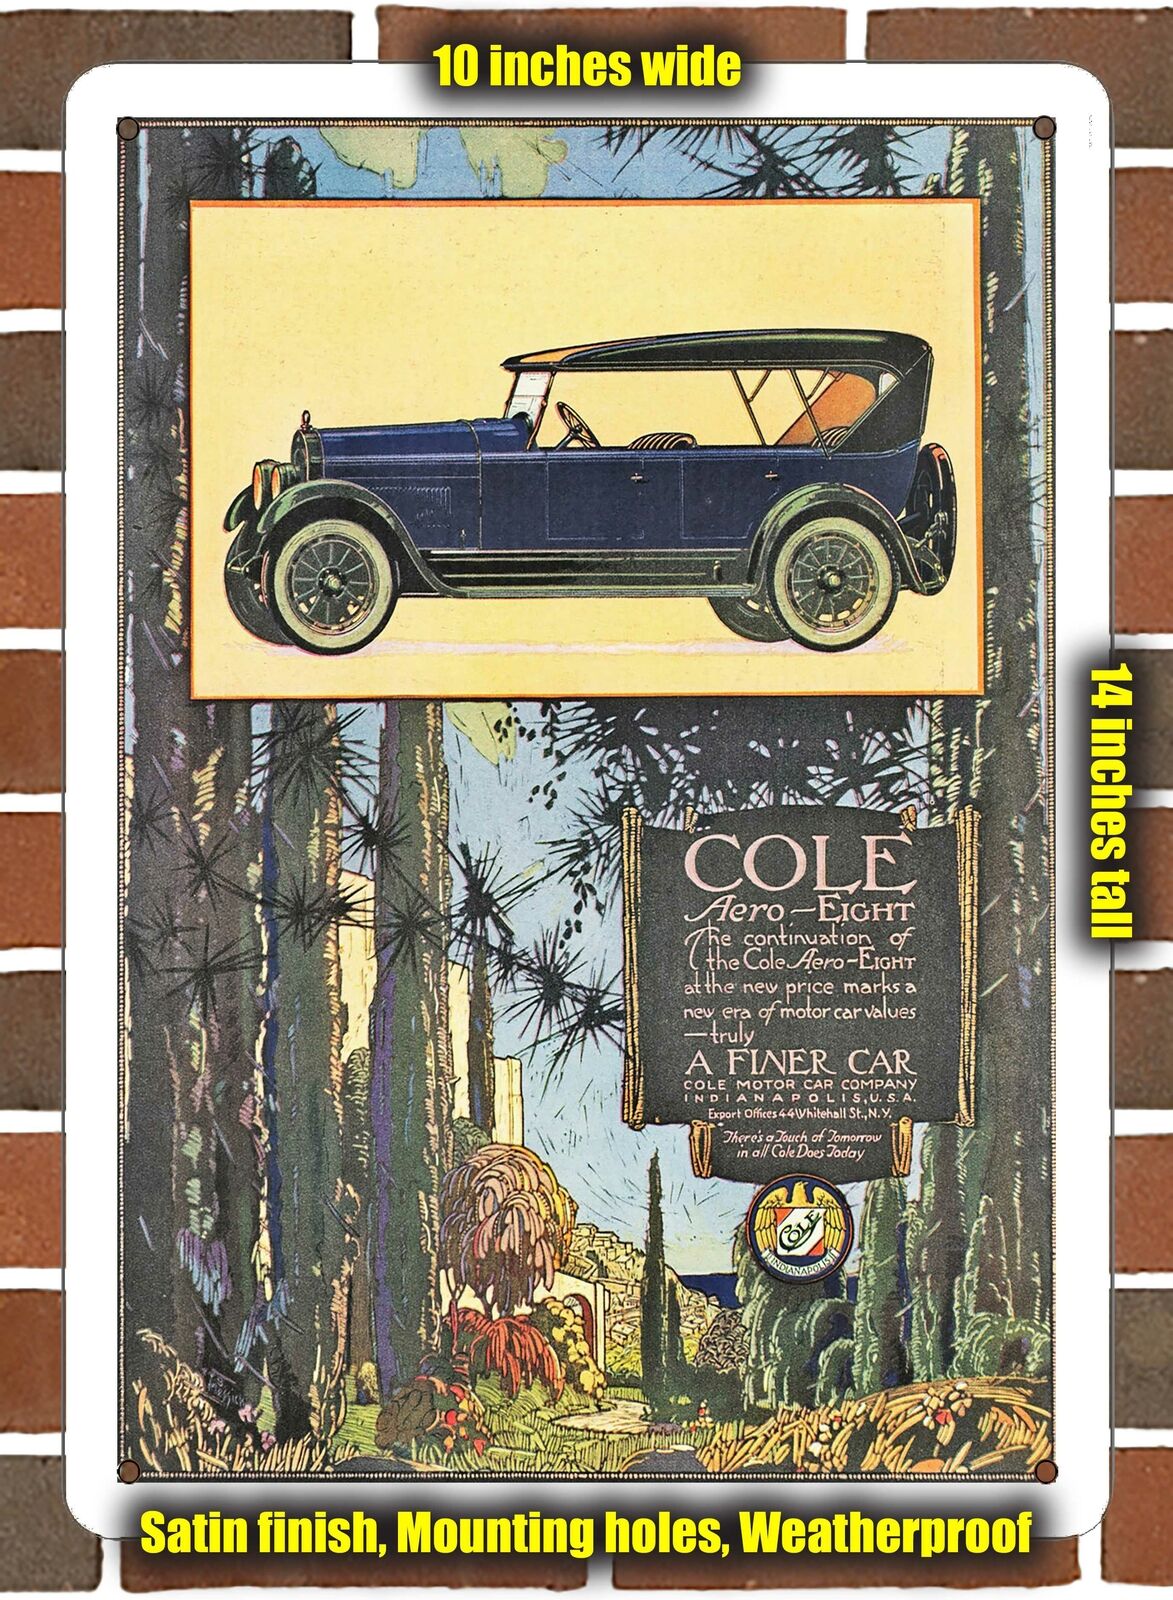 Metal Sign - 1923 Cole Aero-Eight- 10x14 inches